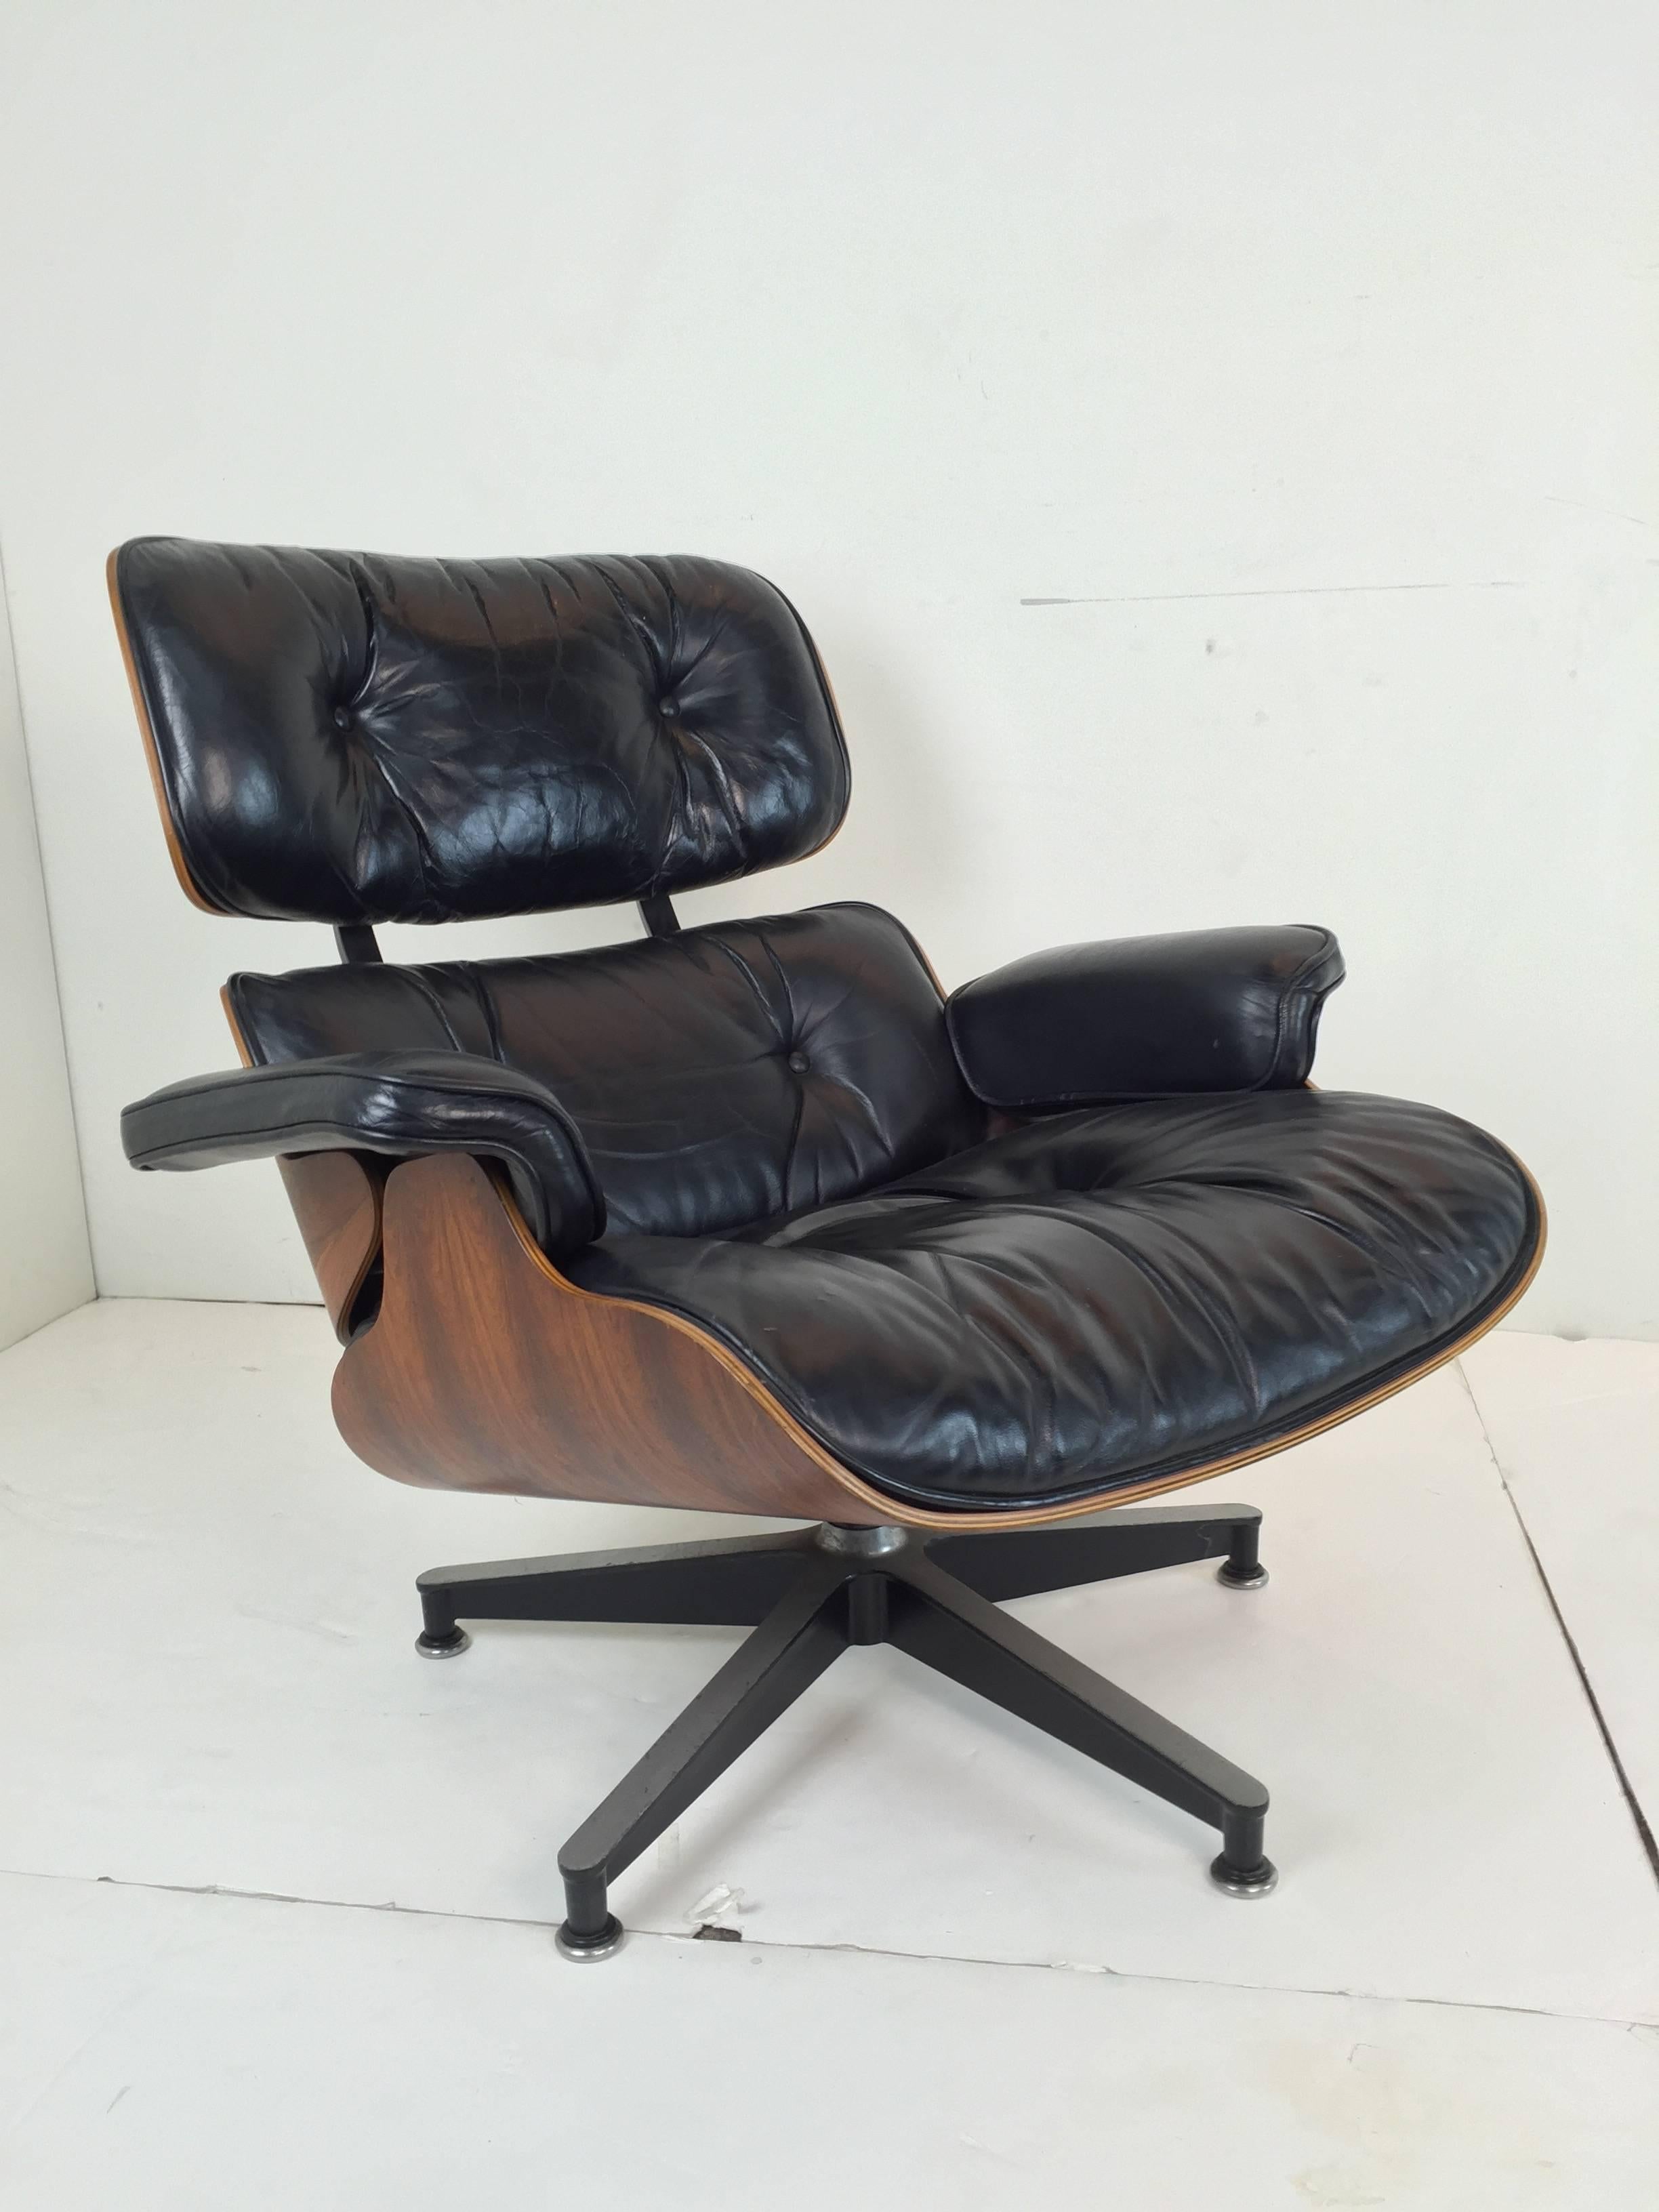 Outstanding All Original 1976 Rosewood Eames Lounge and Ottoman  1